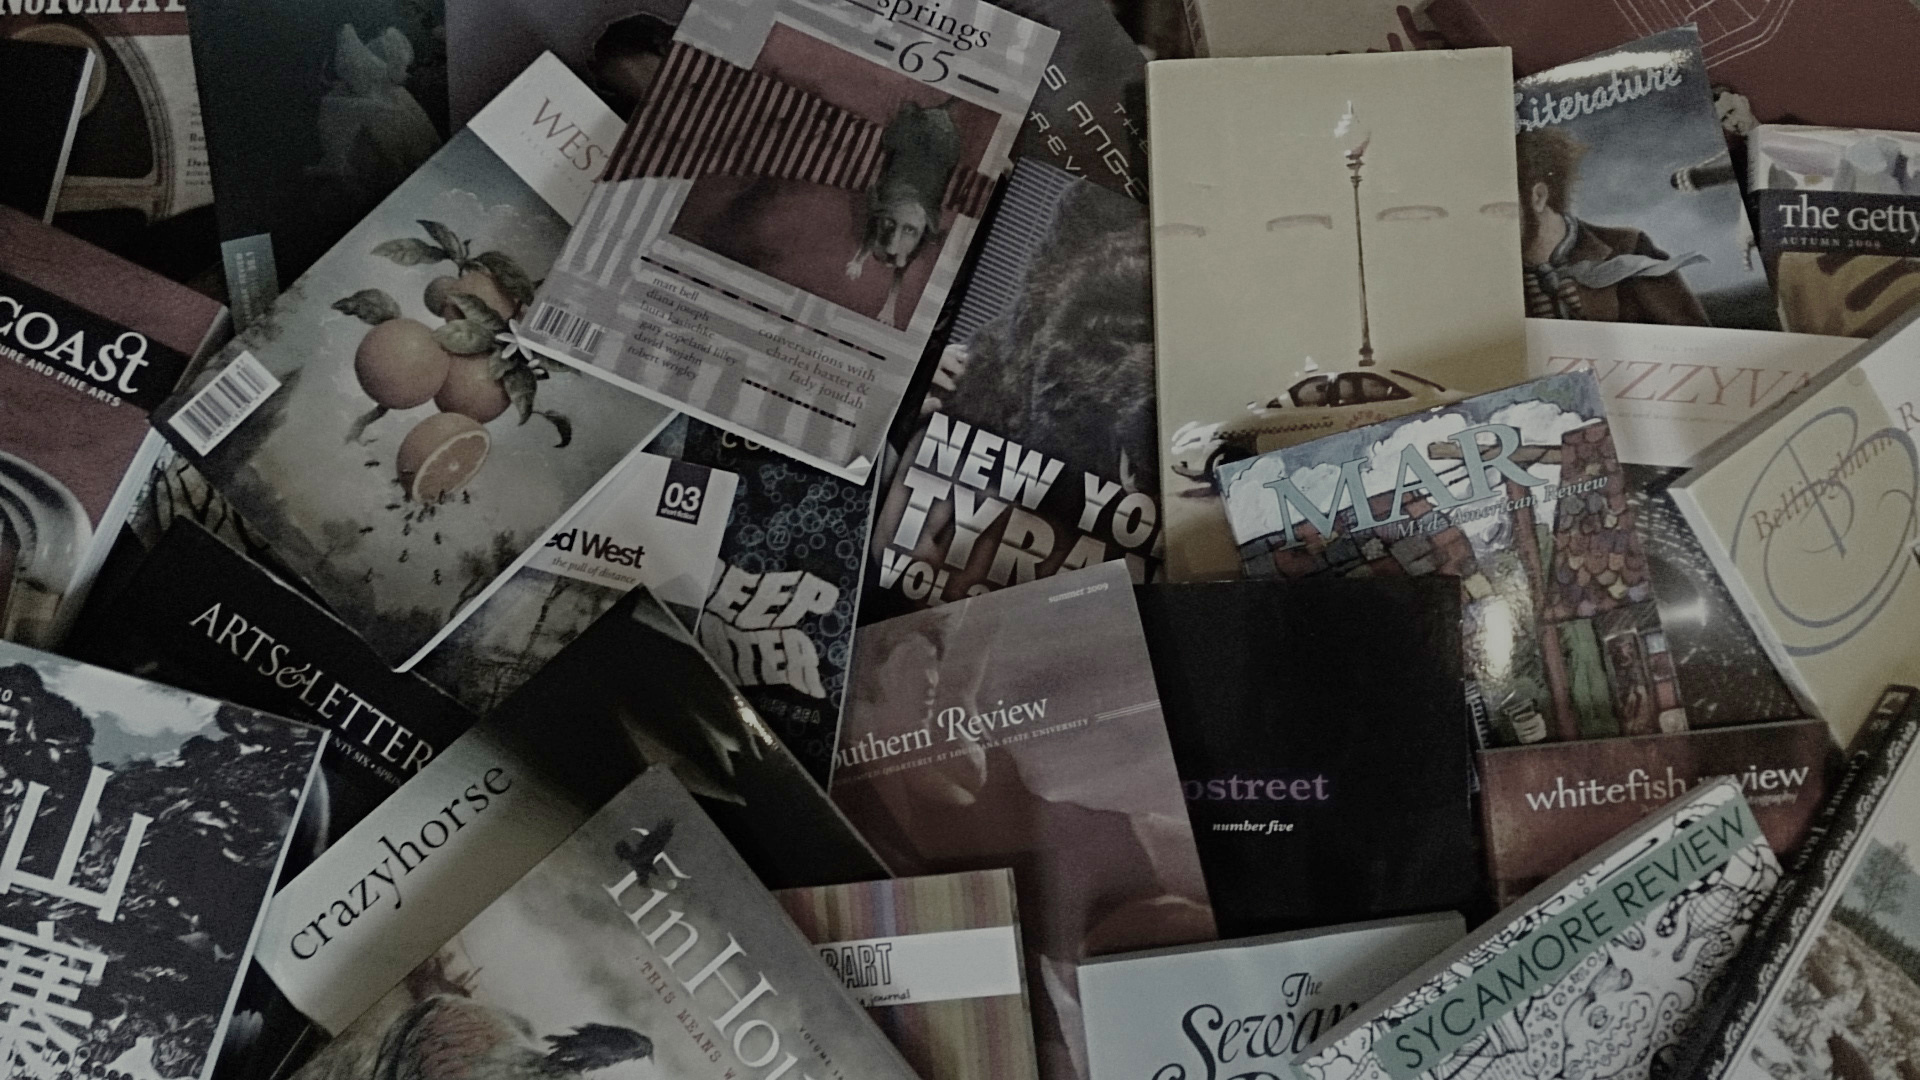 Many literary magazines spread on the floor cover up.